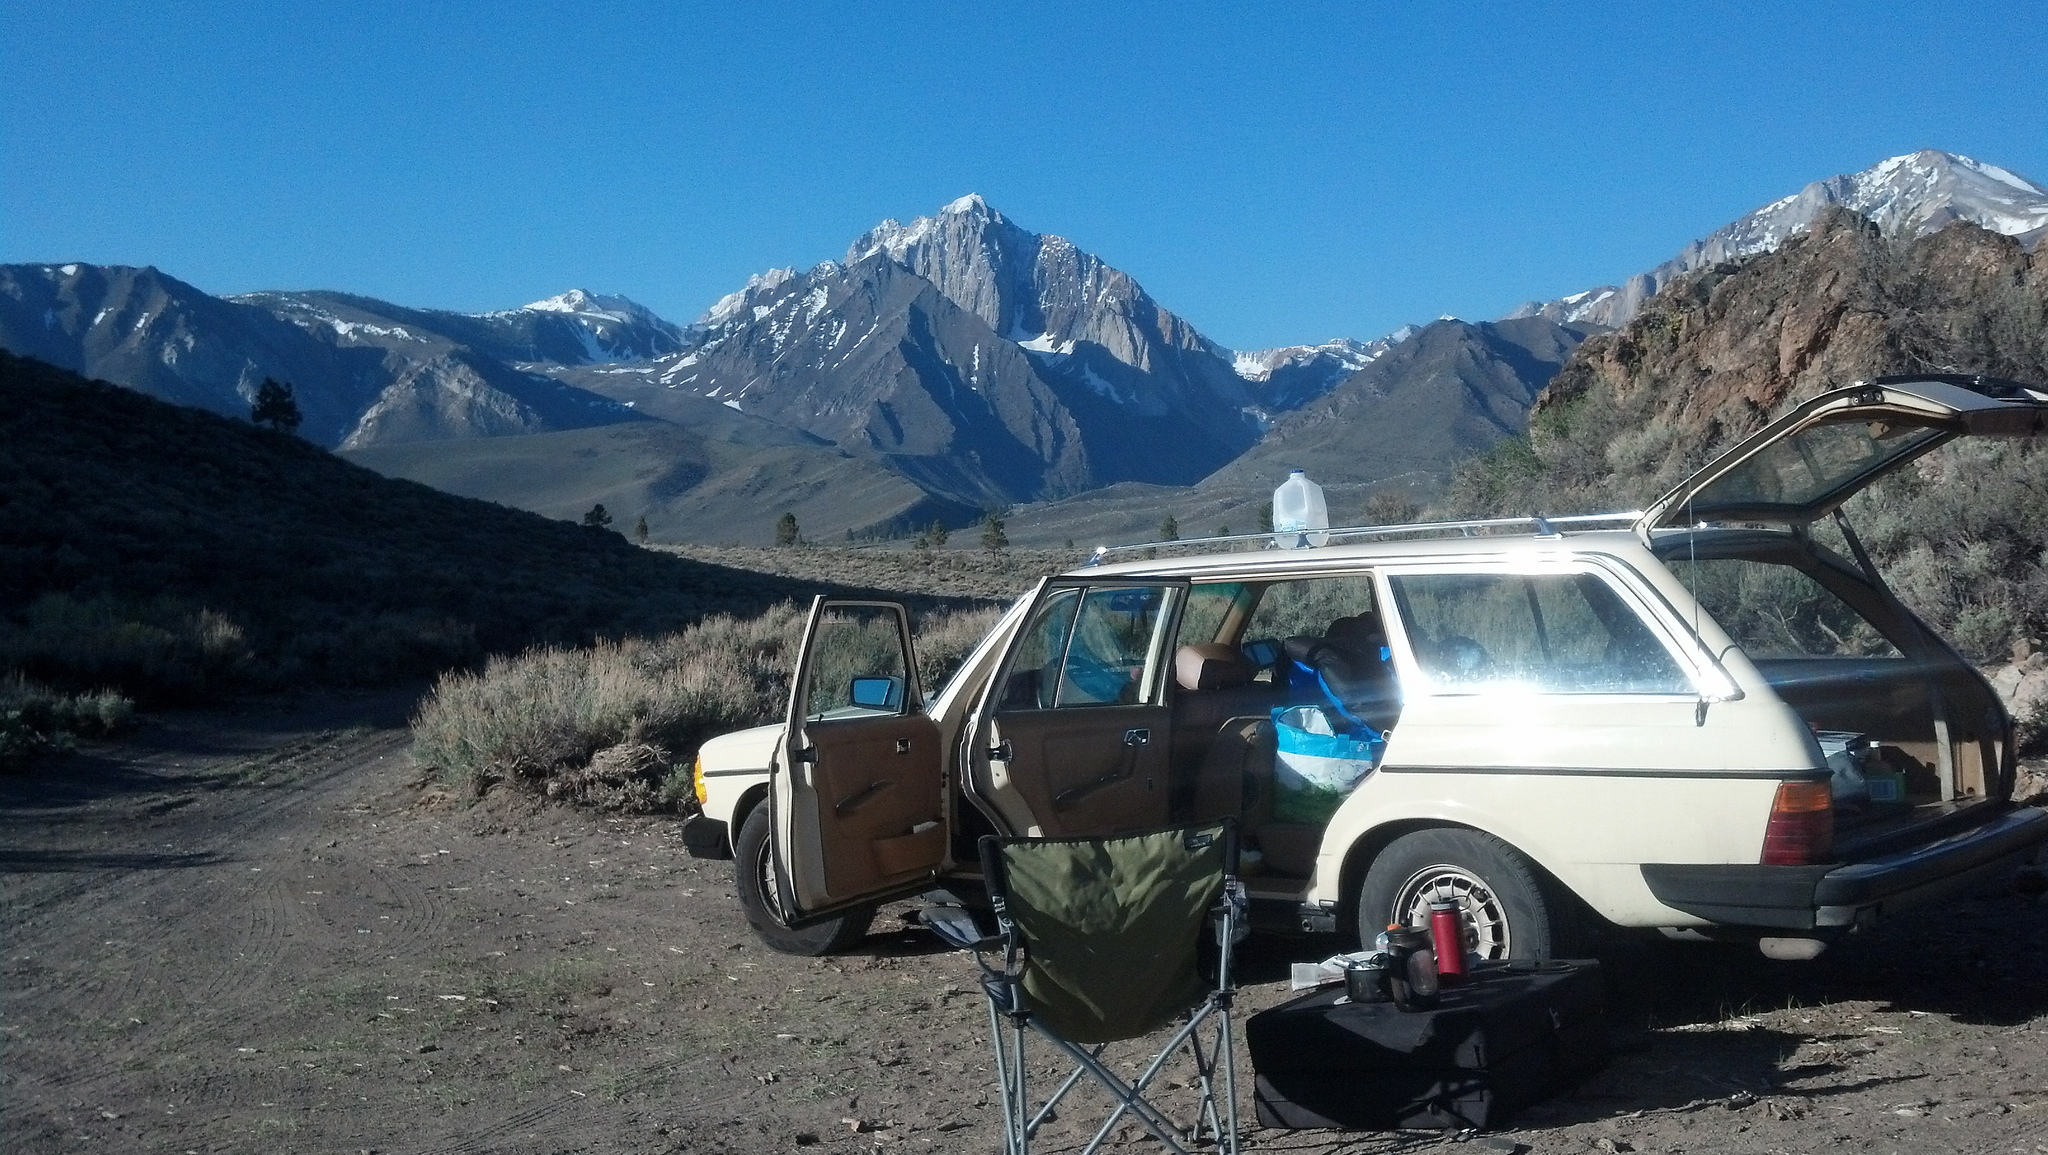 It doesn't get better than BLM living in the Eastern Sierra